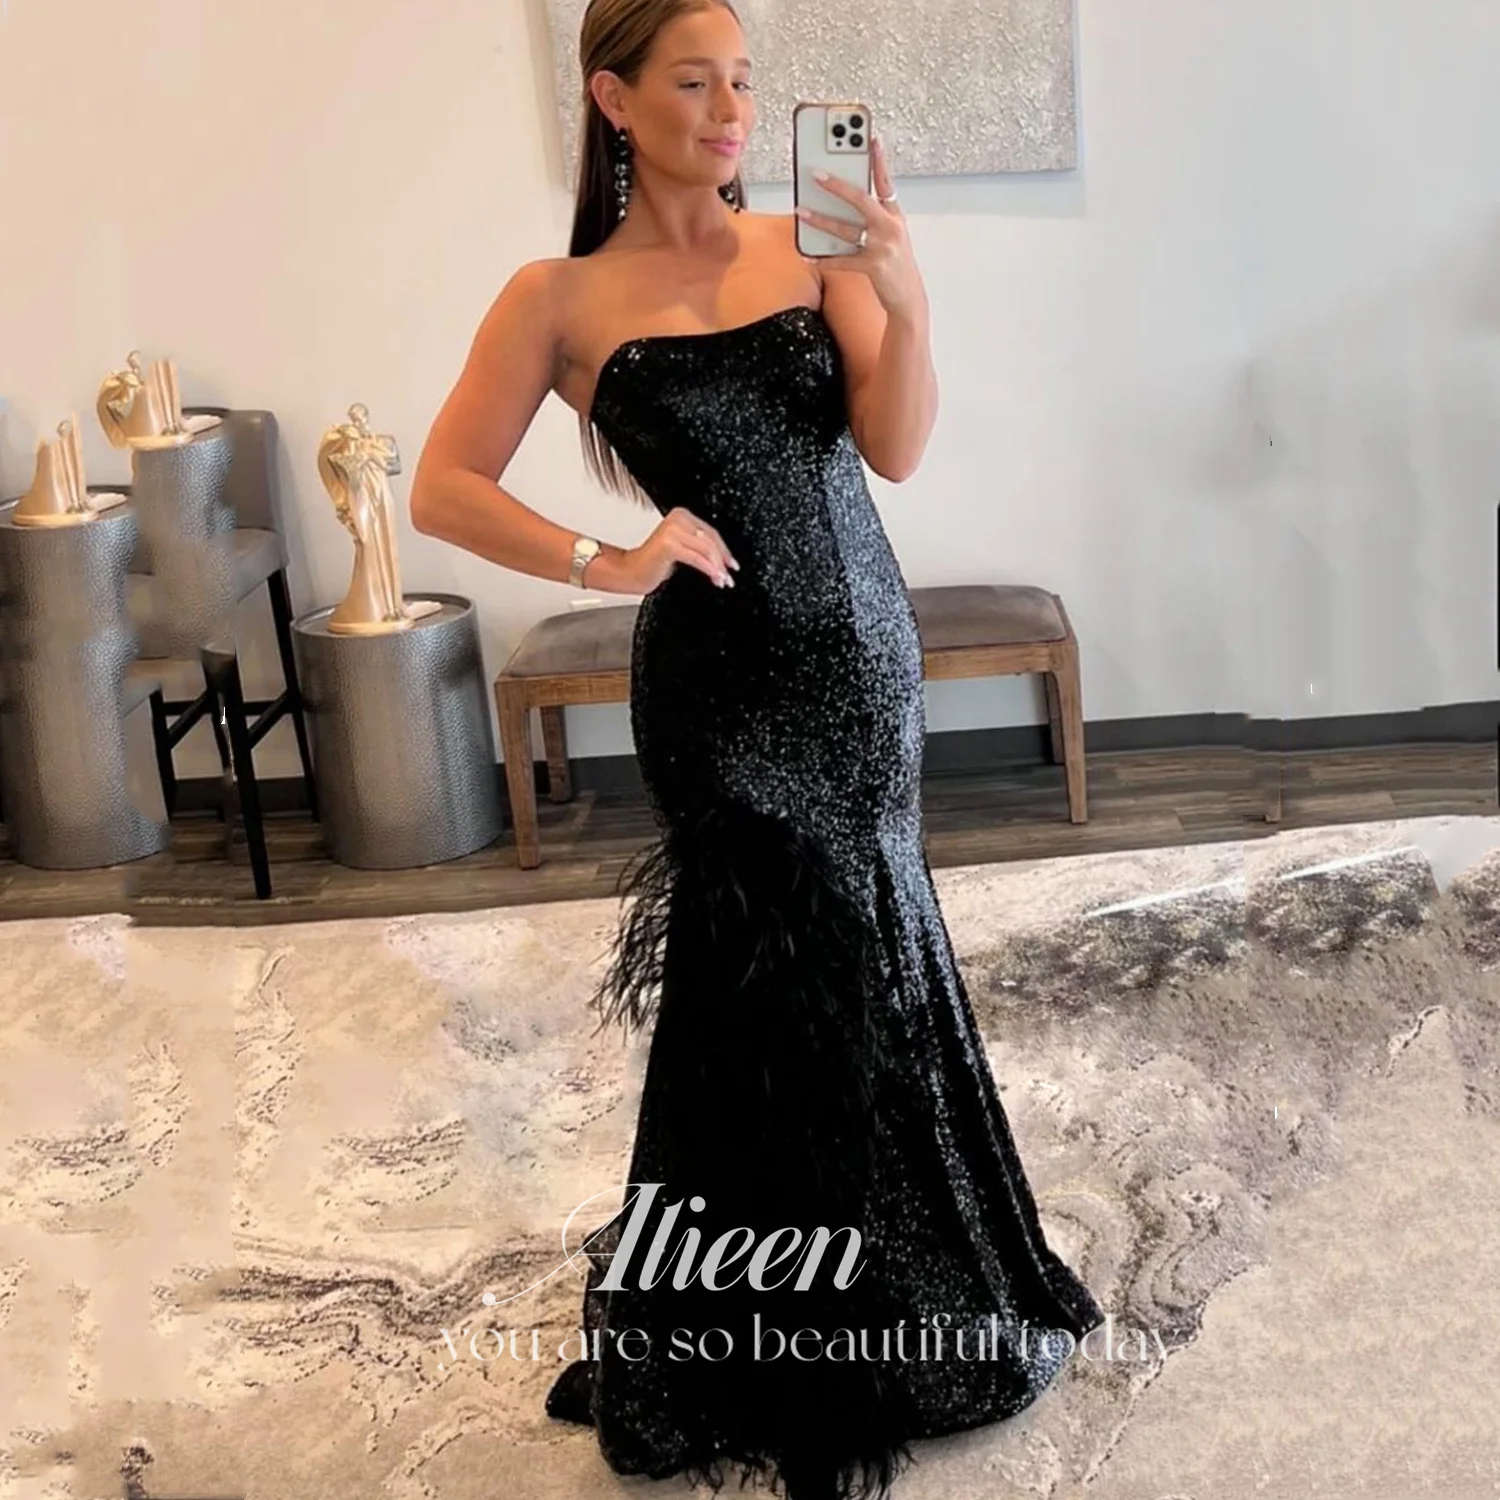 

Aileen Mermaid Woman's Evening Dress Off the Shoulders Saudi Women Sequins Party Dresses Black Cocktail Elegant Luxury Sexy 2023